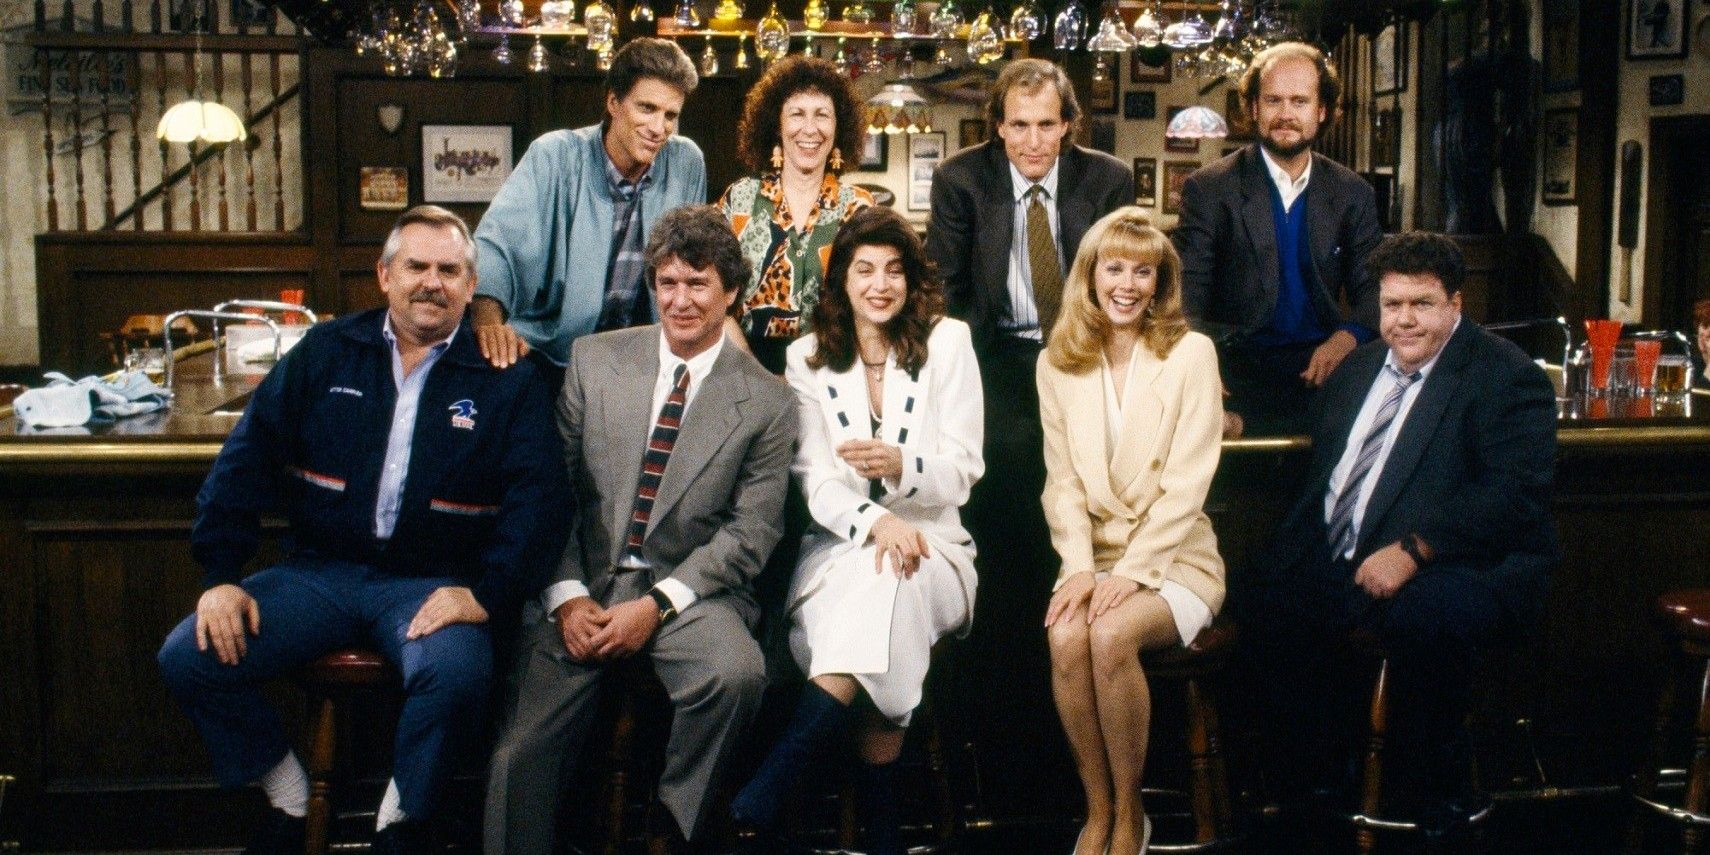 The cast of Cheers together in the bar